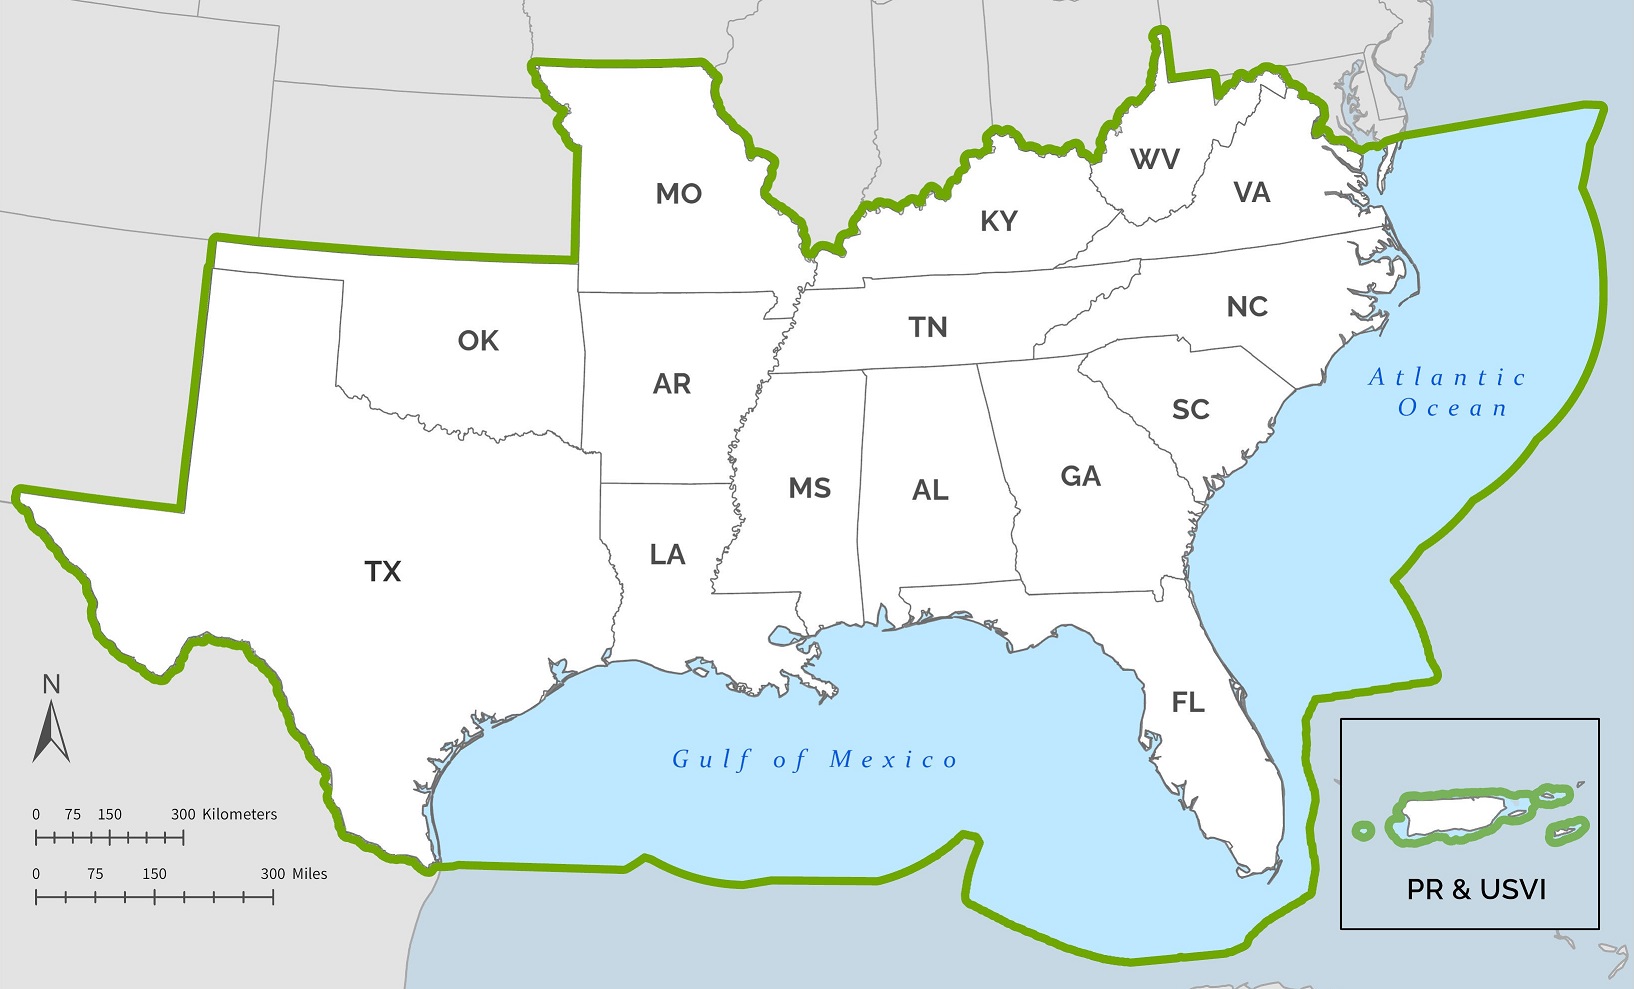 Map of the SECAS geography outlining 15 states of the Southeast, Puerto Rico, U.S. Virgin Islands, and the offshore marine environment in green